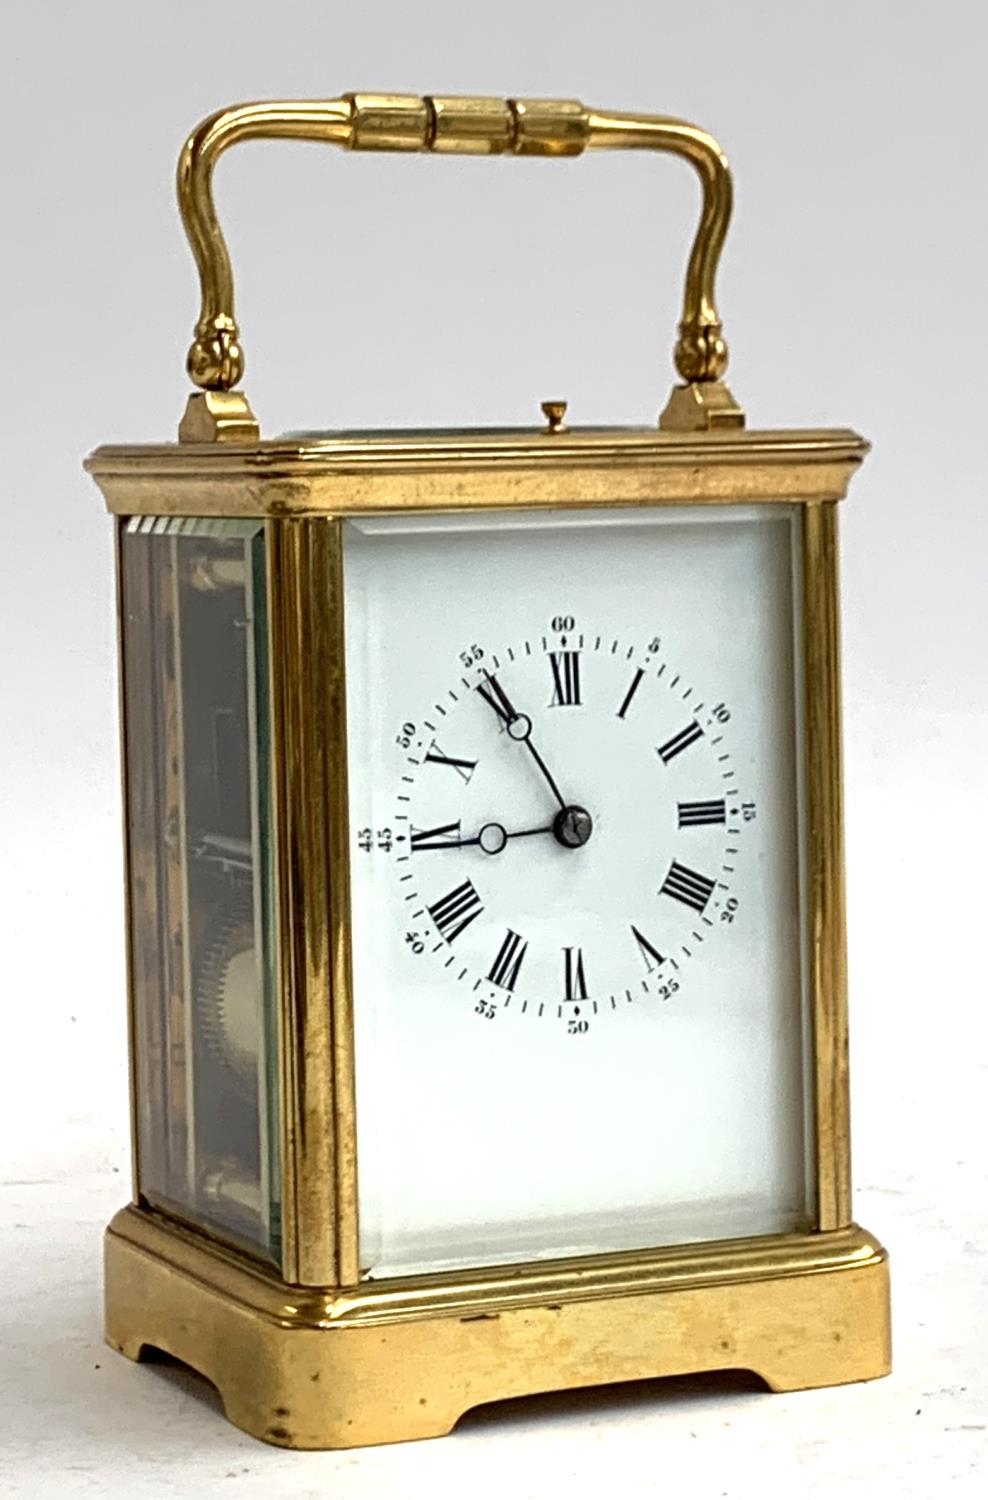 A heavy gilt metal carriage clock, bevelled glass panels, enamel dial with Roman numerals,